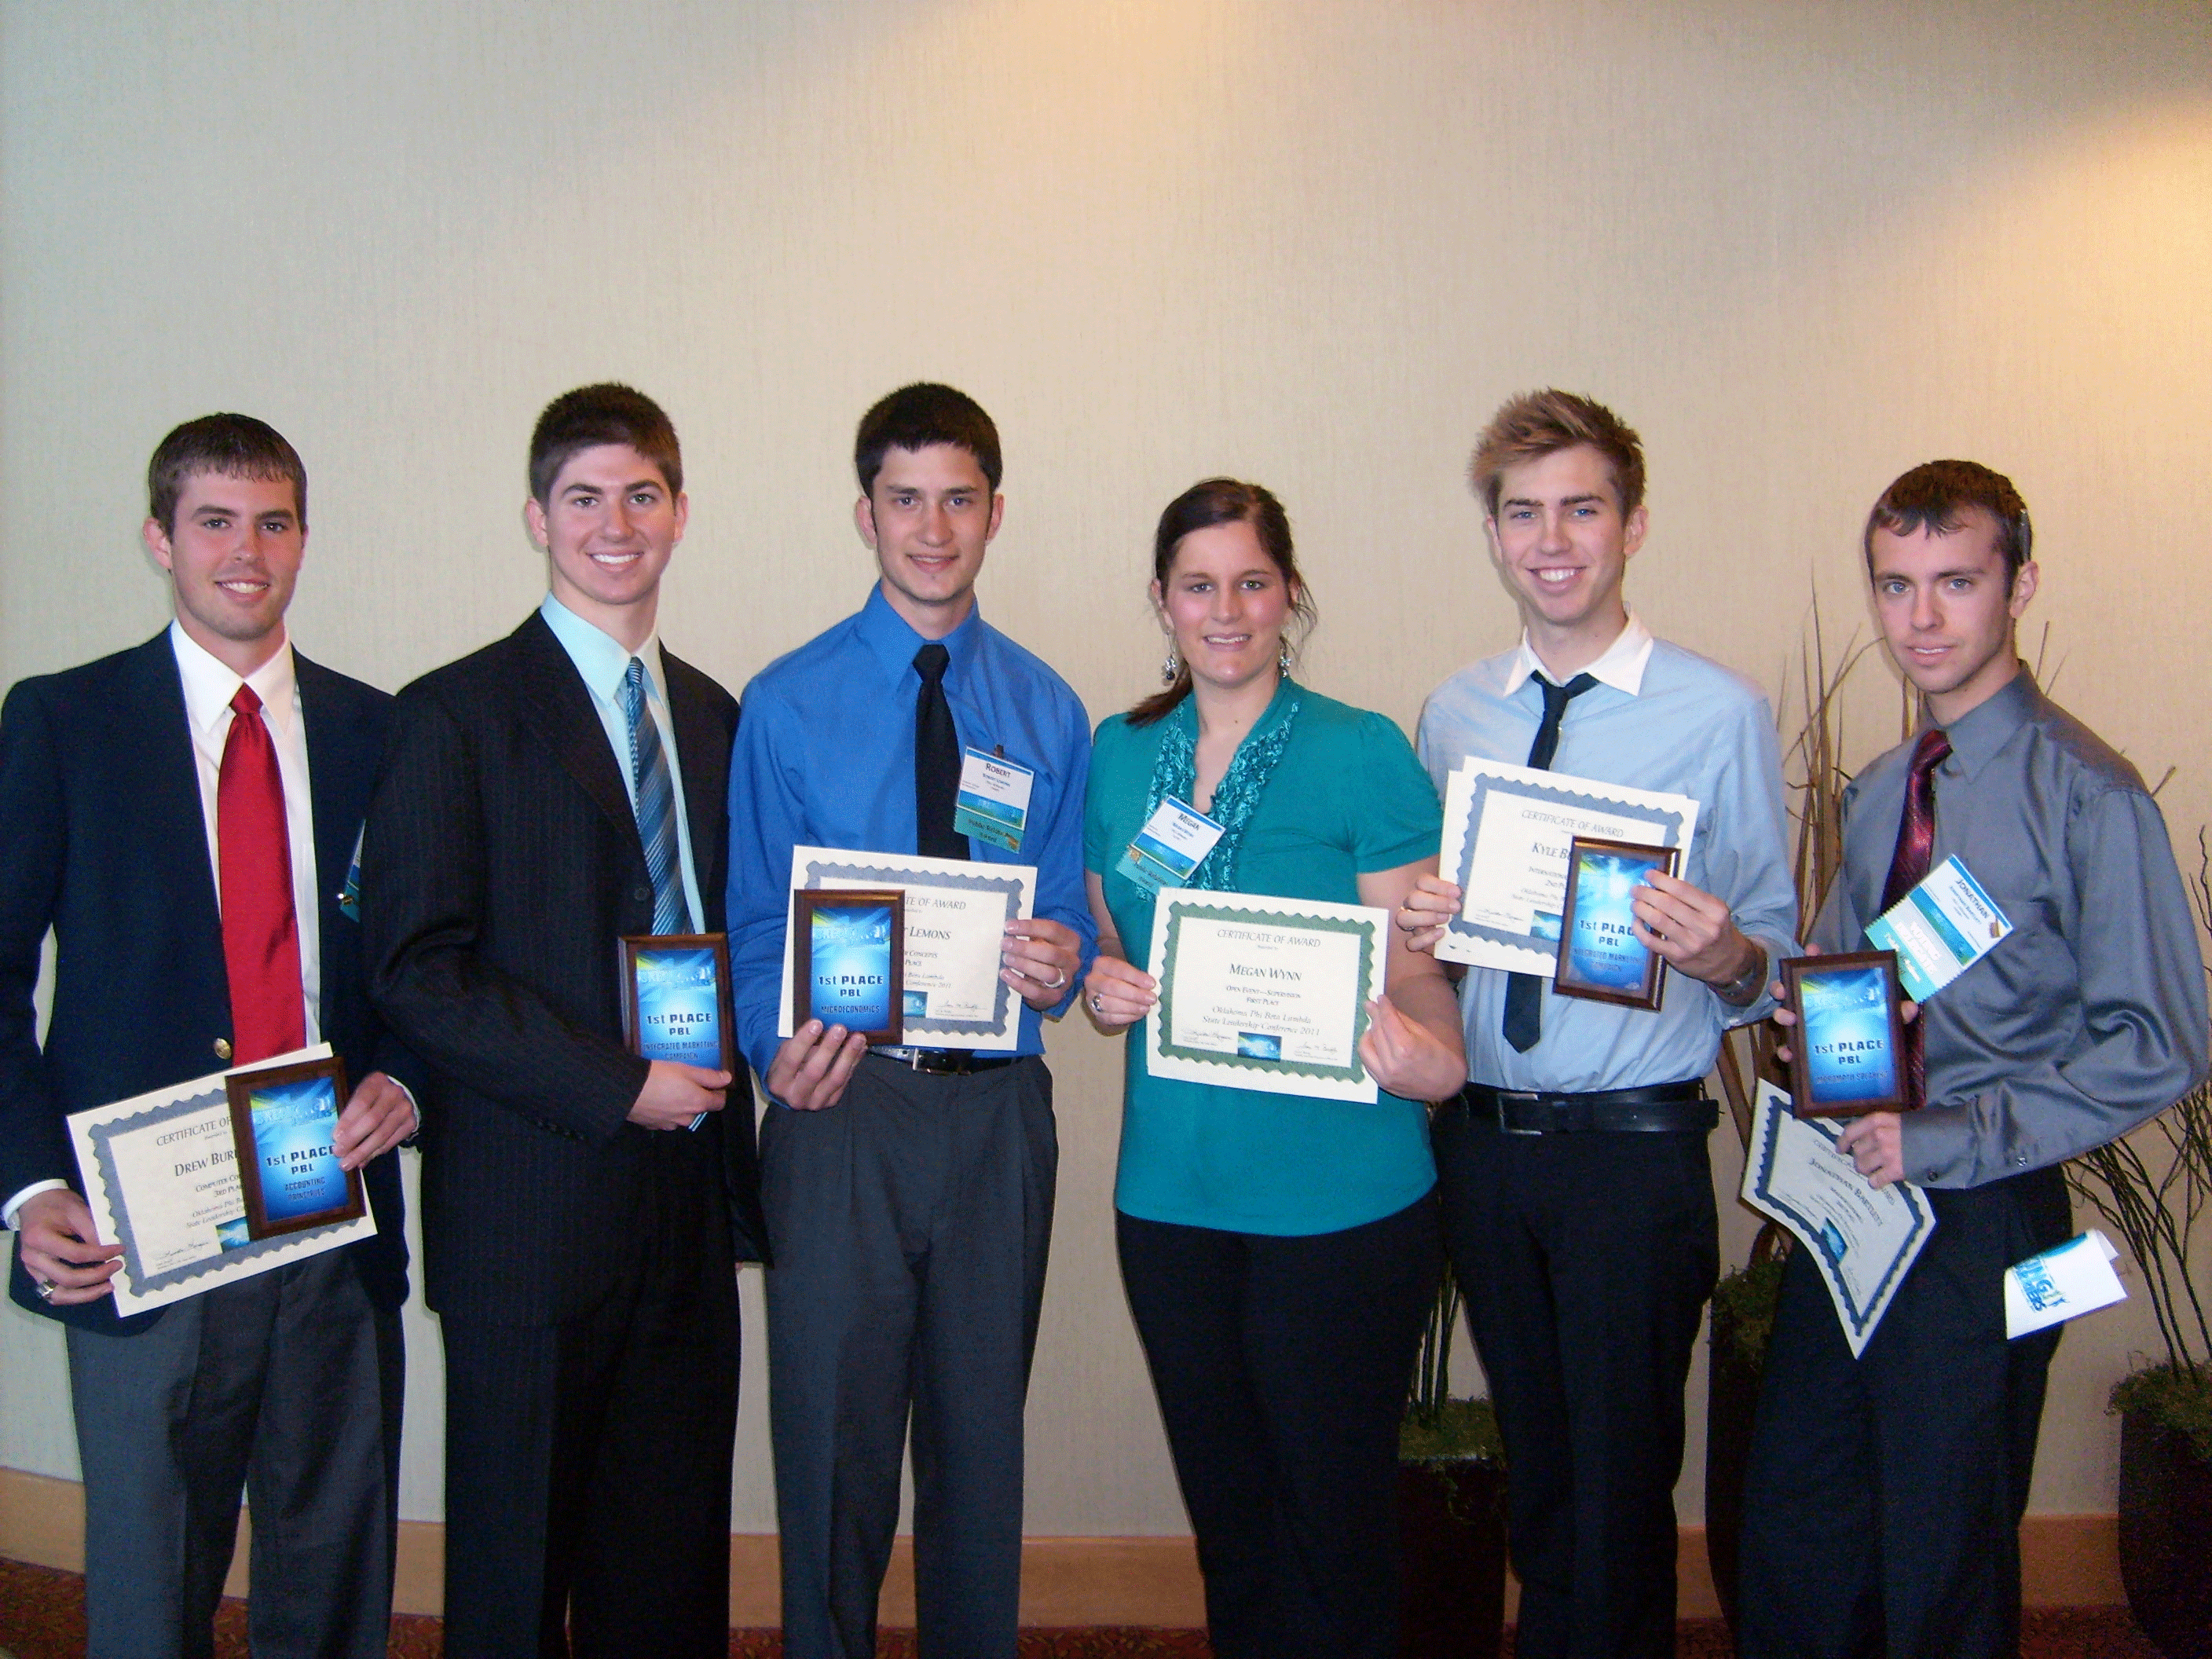 (From left to right) Oklahoma State University students Drew Burkhart, Mark Fiegener, Robert Lemons, Megan Wynn, Kyle Buthod and Jonathan Bartlett recently excelled at the 2011 State Leadership Conference for Oklahoma Future Business Leaders of America – Phi Beta Lambda. They all qualified to compete at the National Leadership Conference in Orlando, Fla., this June.